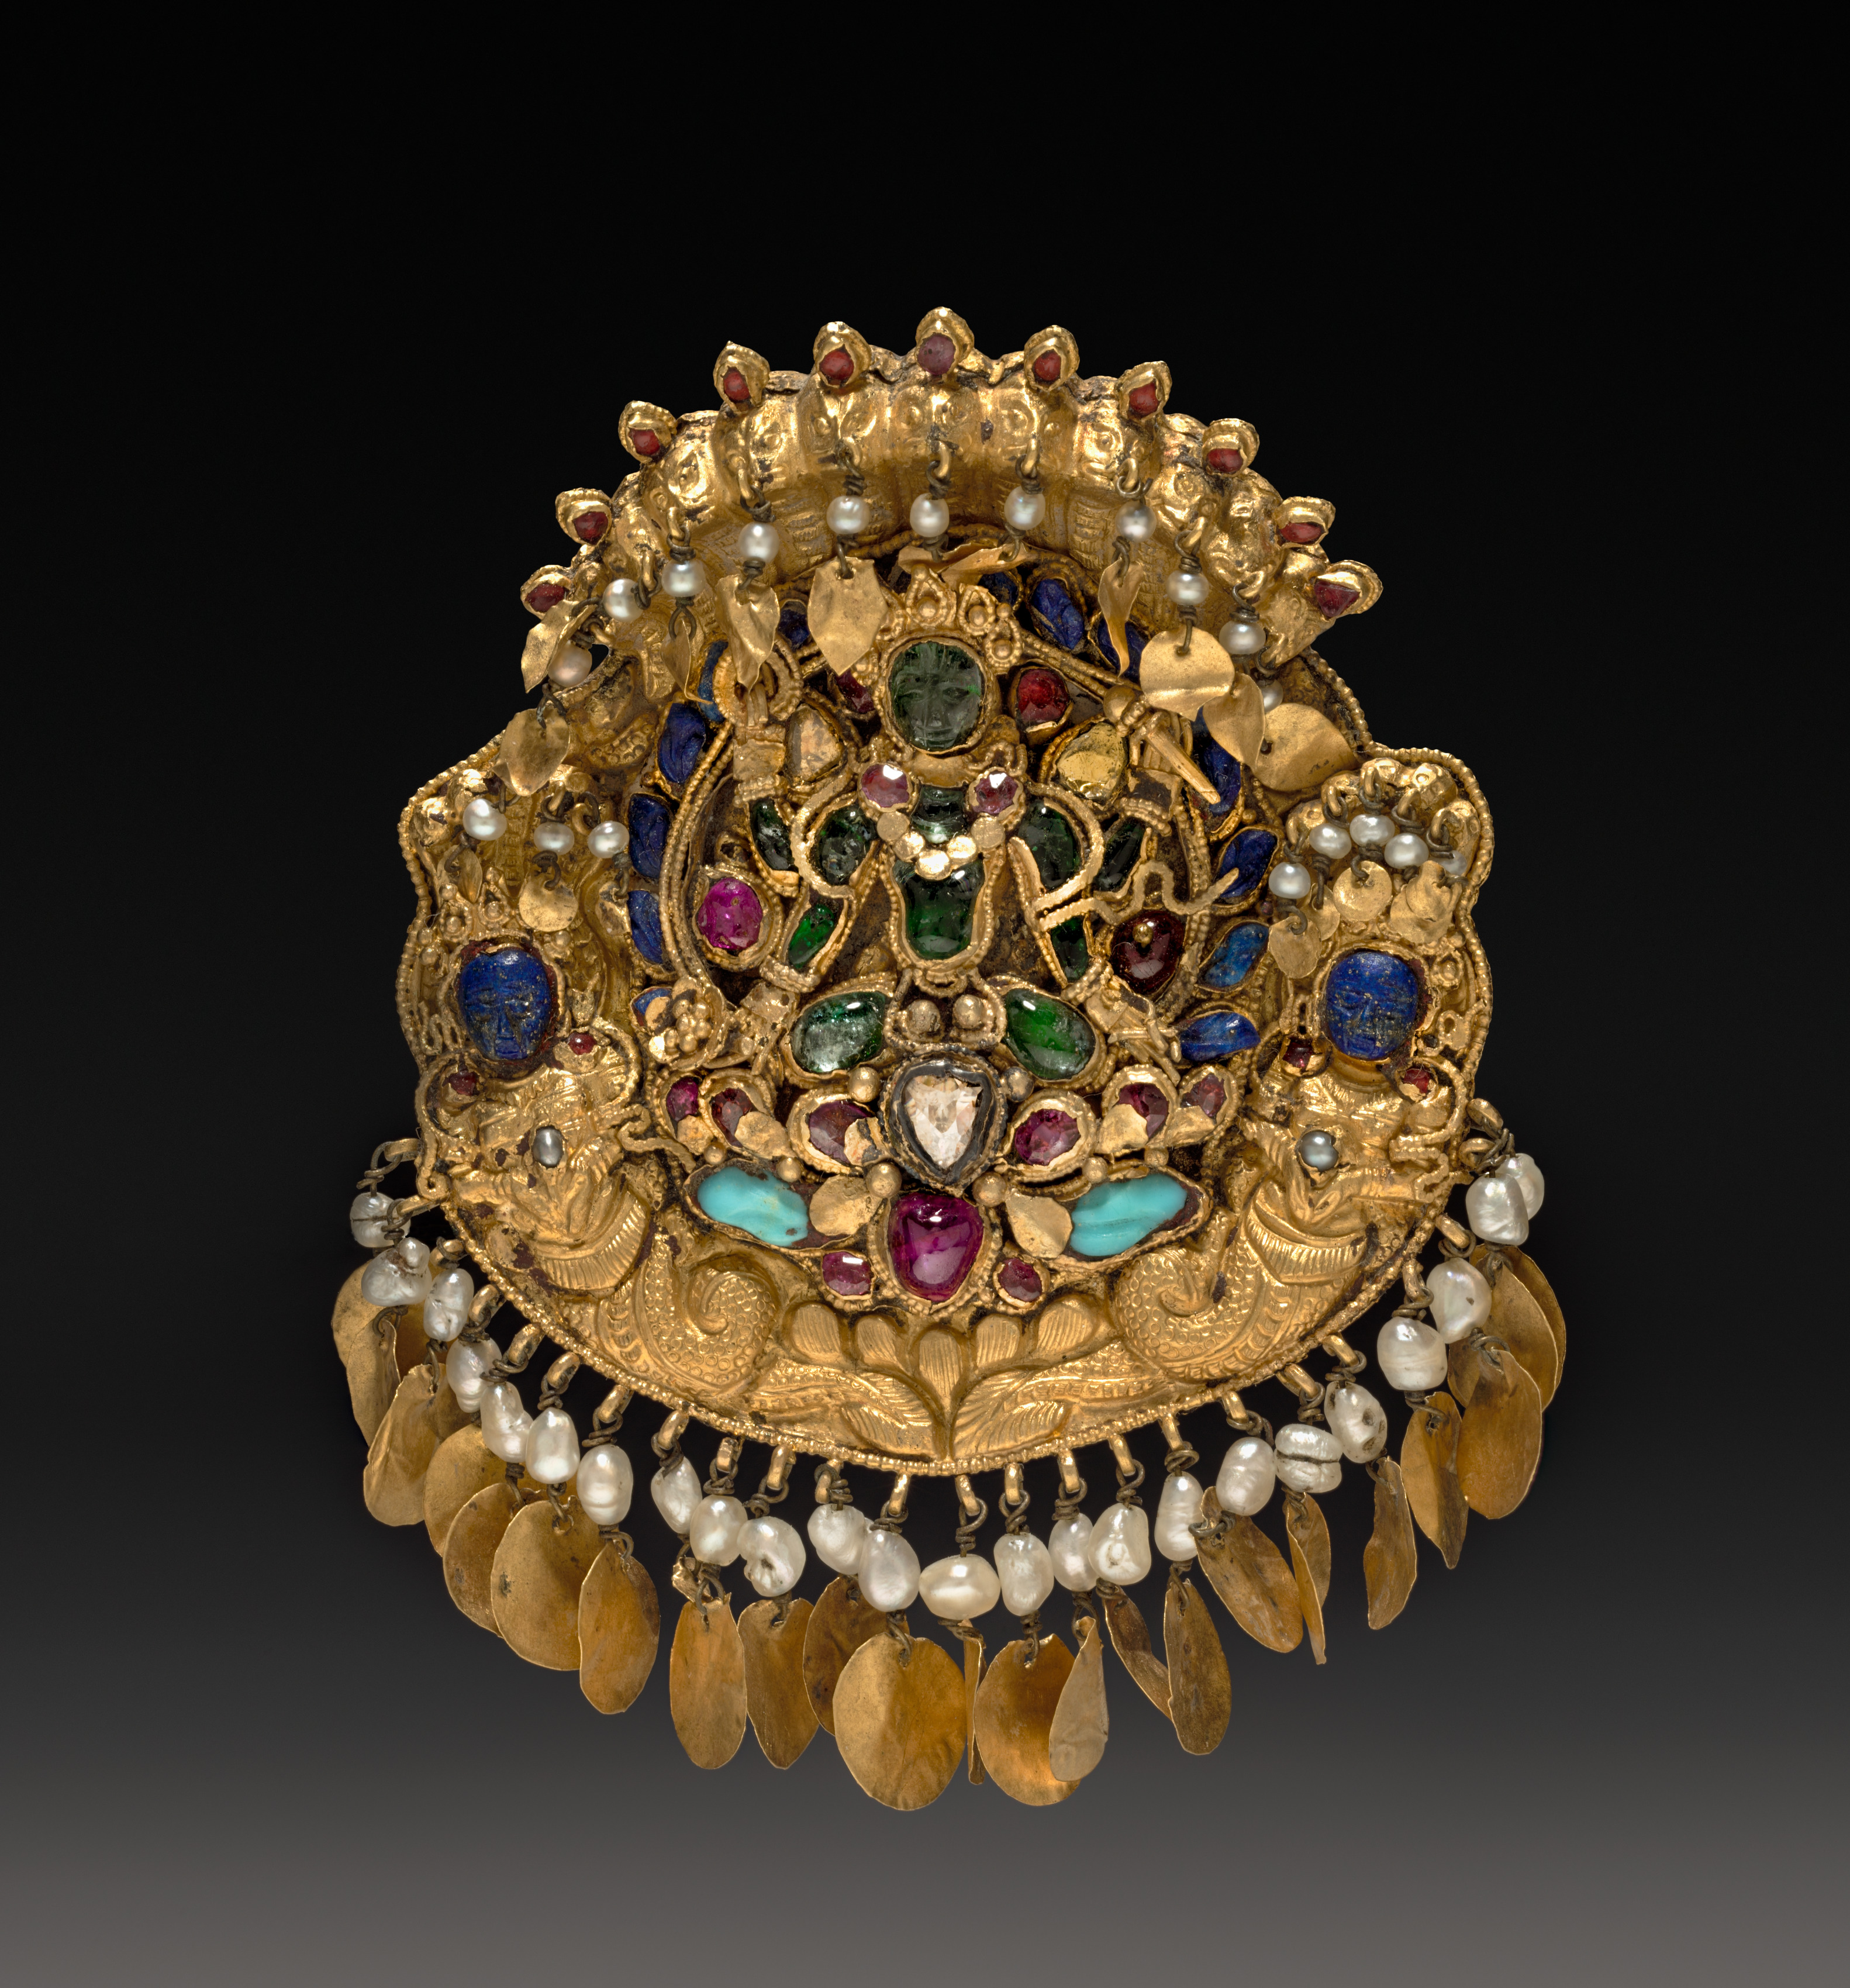 Pendant with Four-armed Green Vishnu on a lotus with Nagas